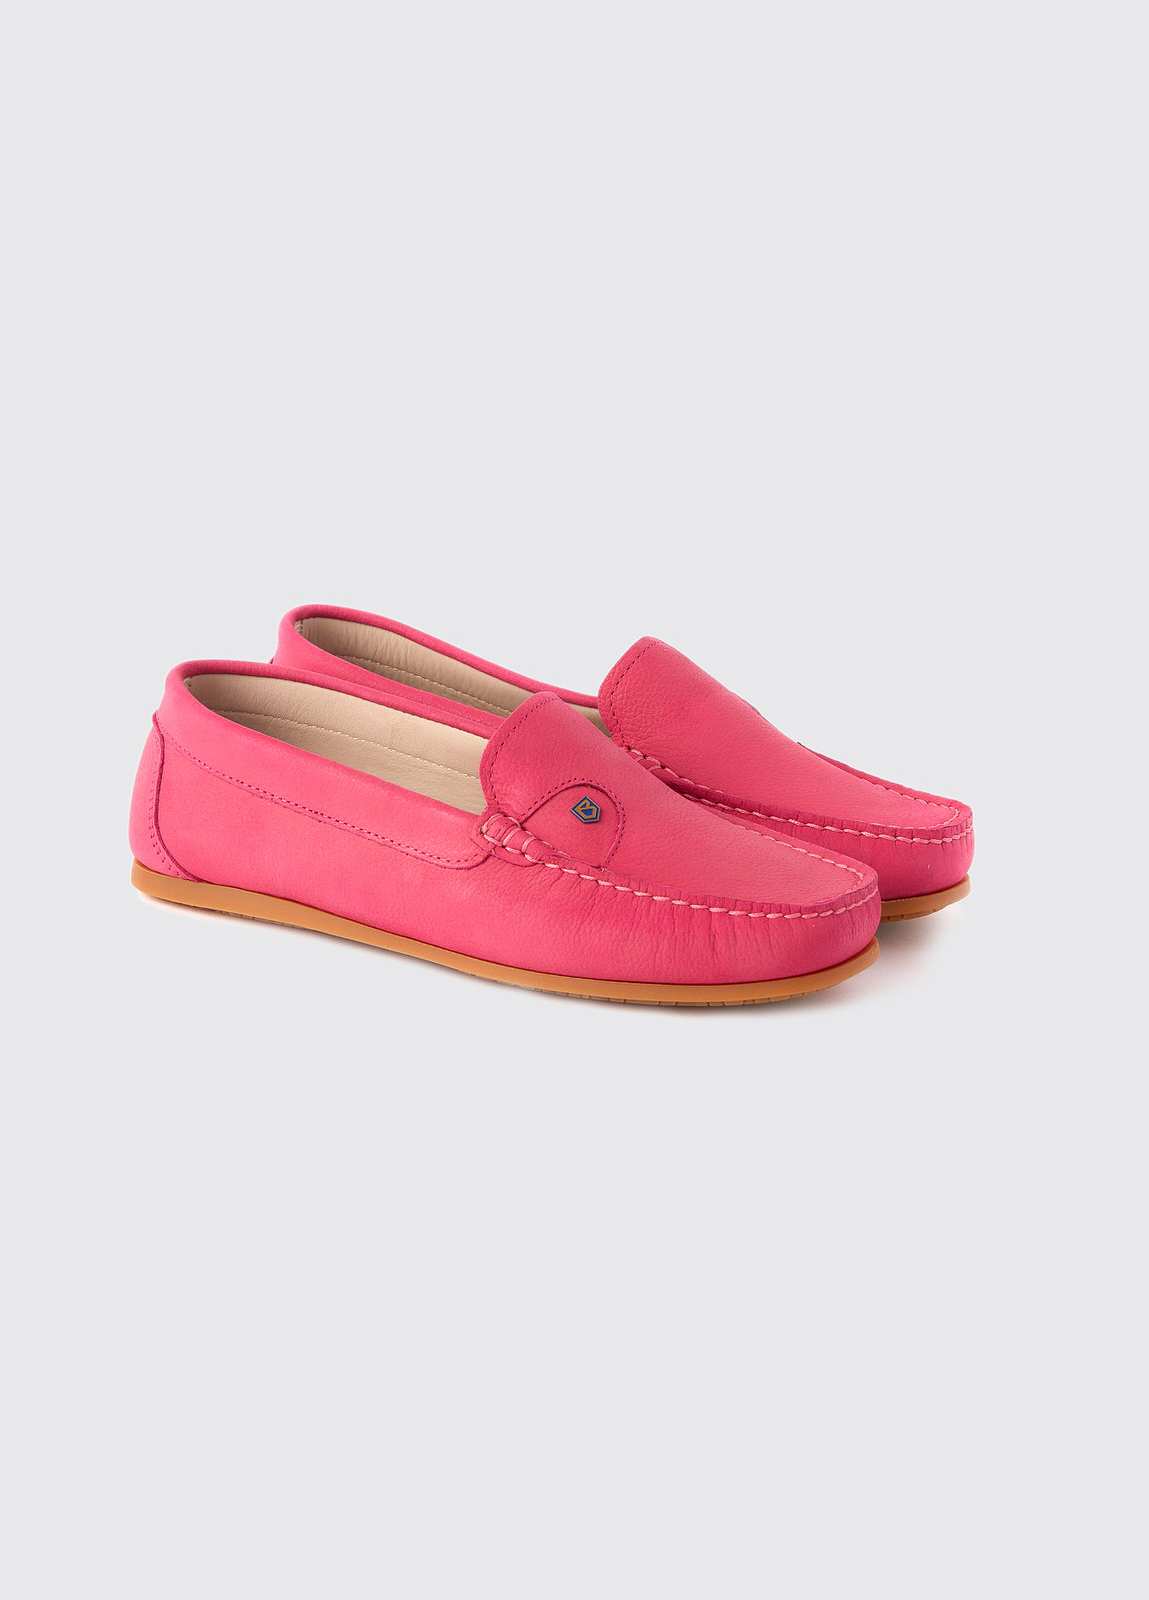 Bali Loafer - Orchid